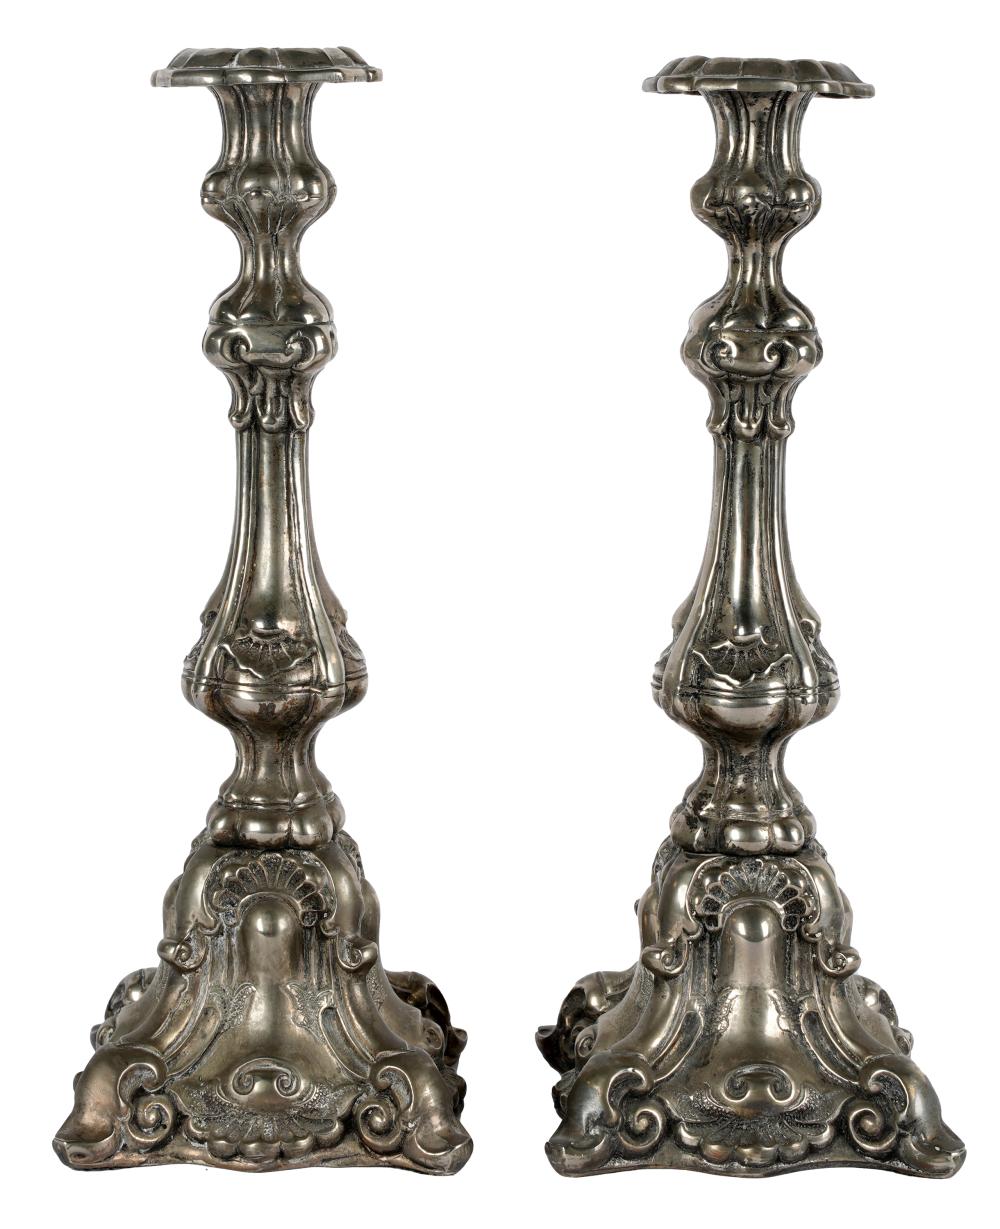 PAIR OF PORTUGUESE-STYLE SILVERED